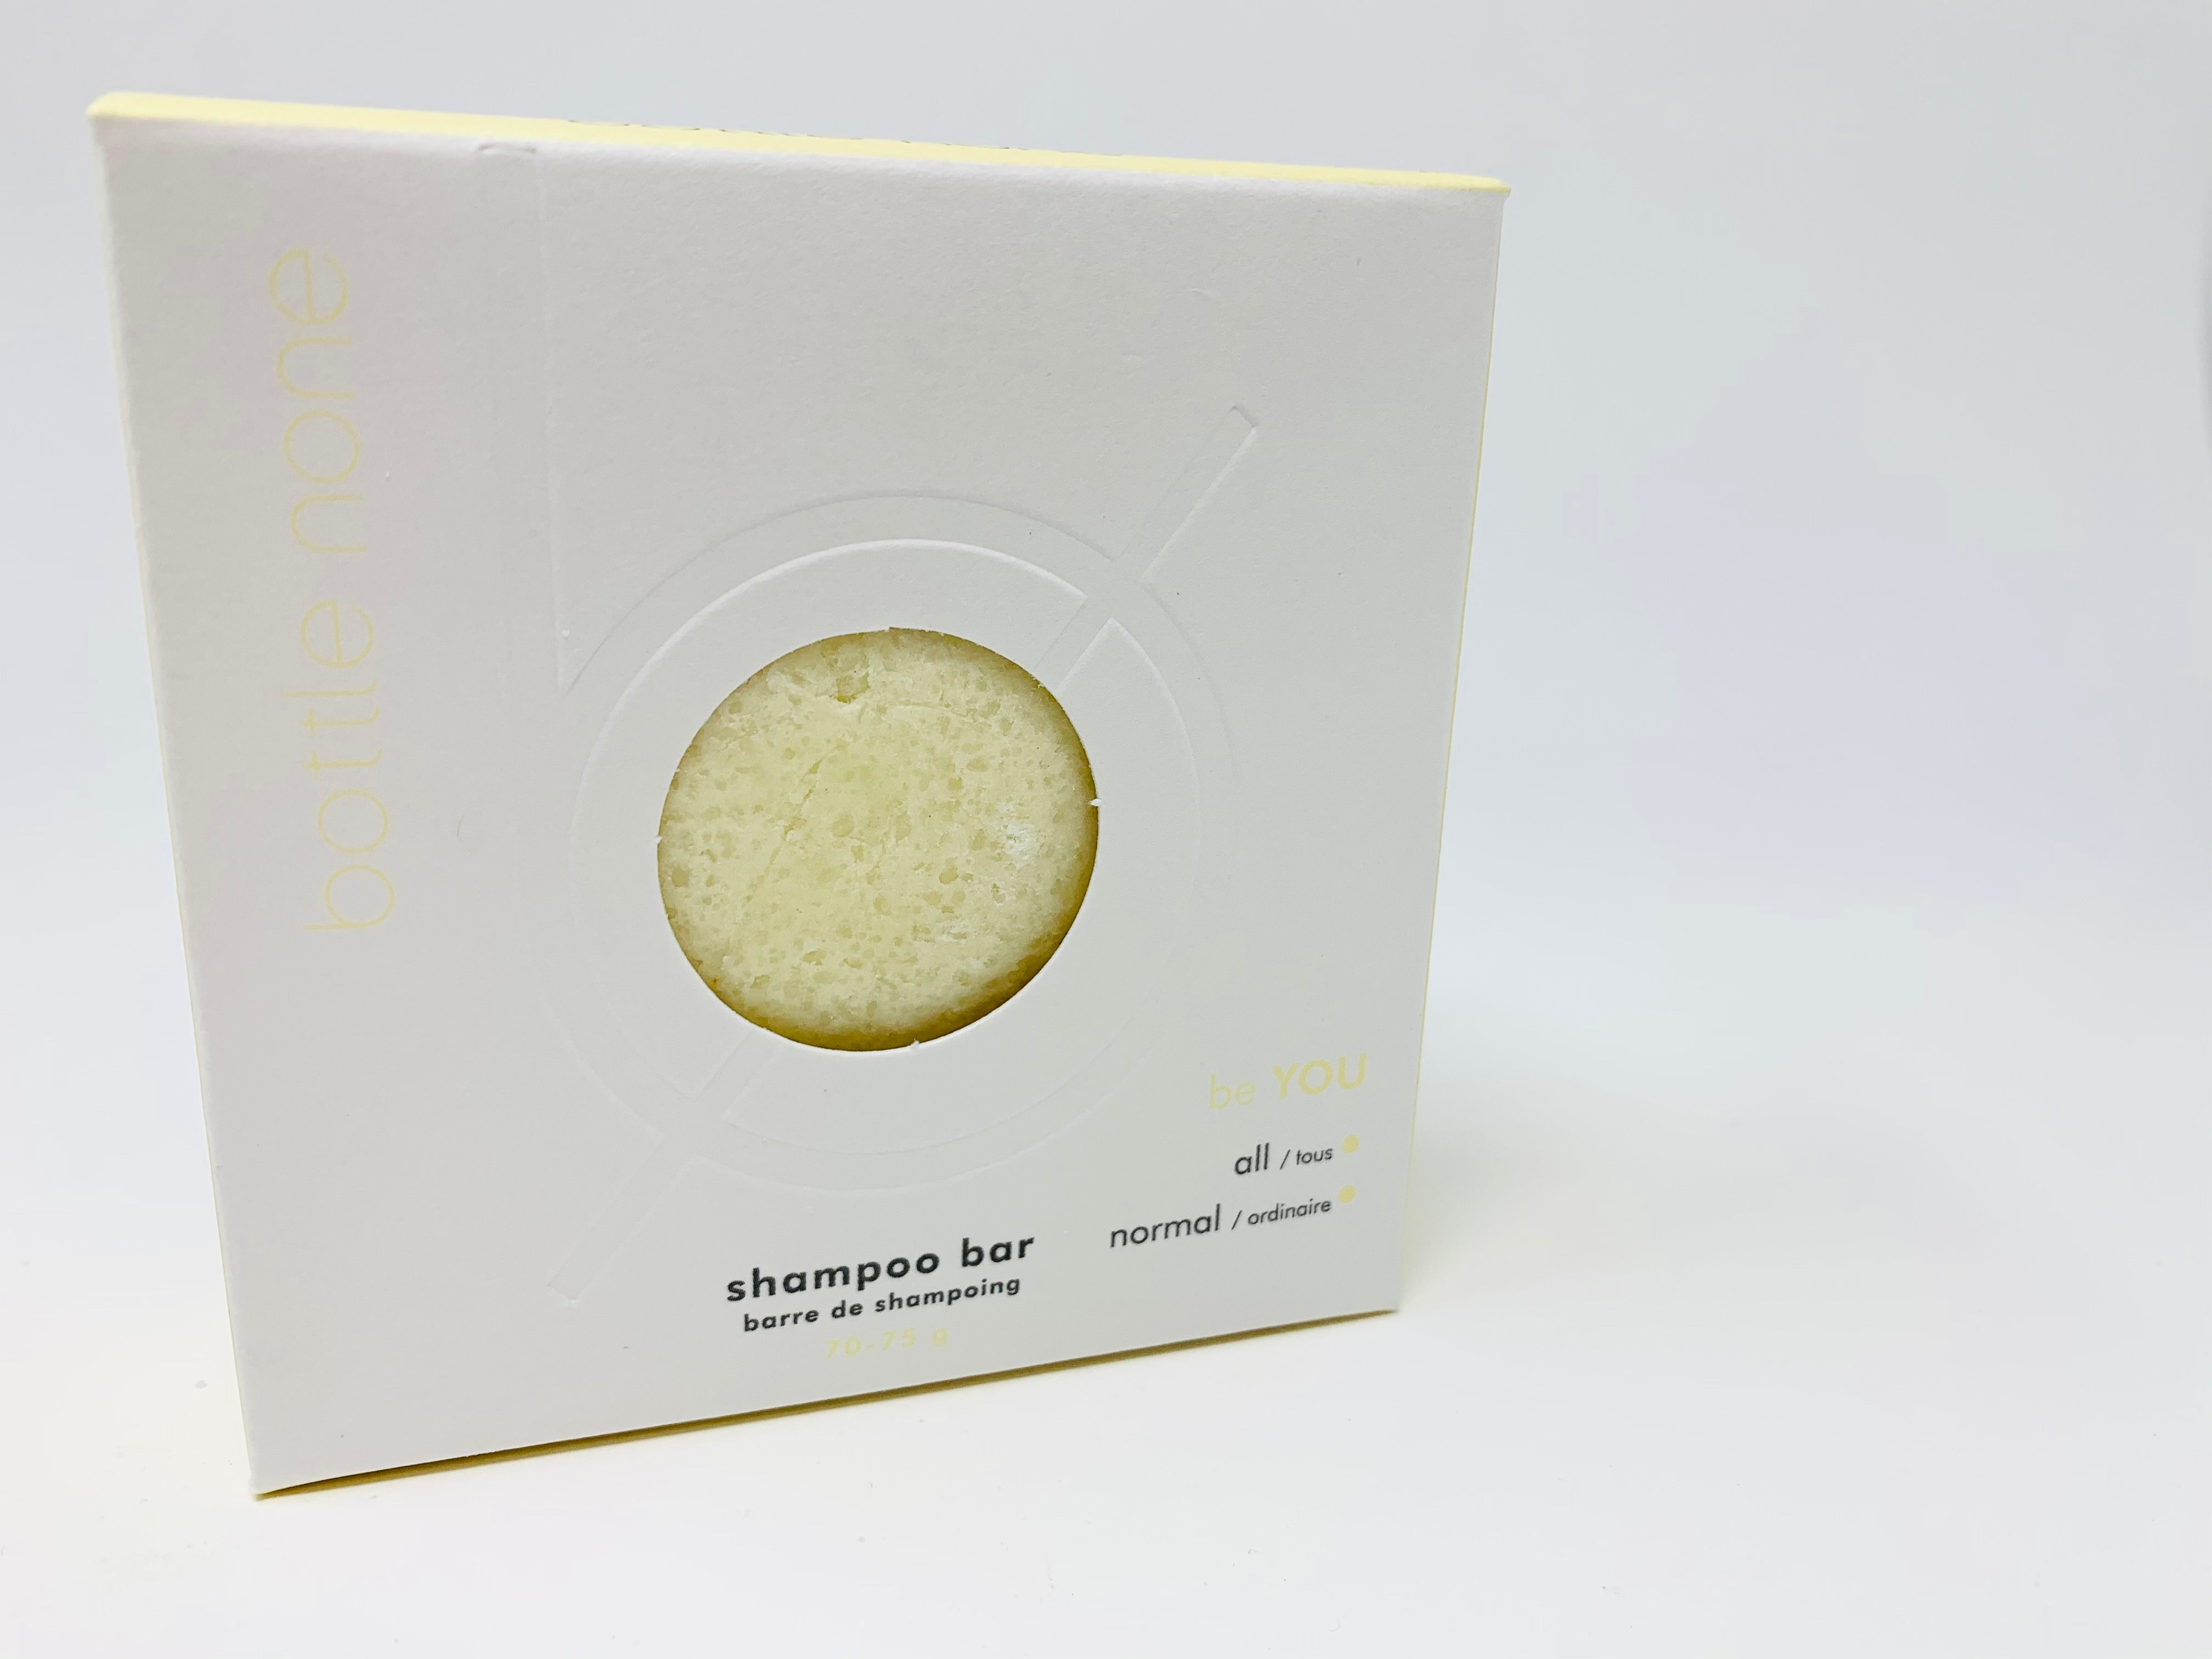 be YOU Shampoo Bar 70-75g - WHOLESALE be YOU - nelsonnaturals remineralizing toothpaste